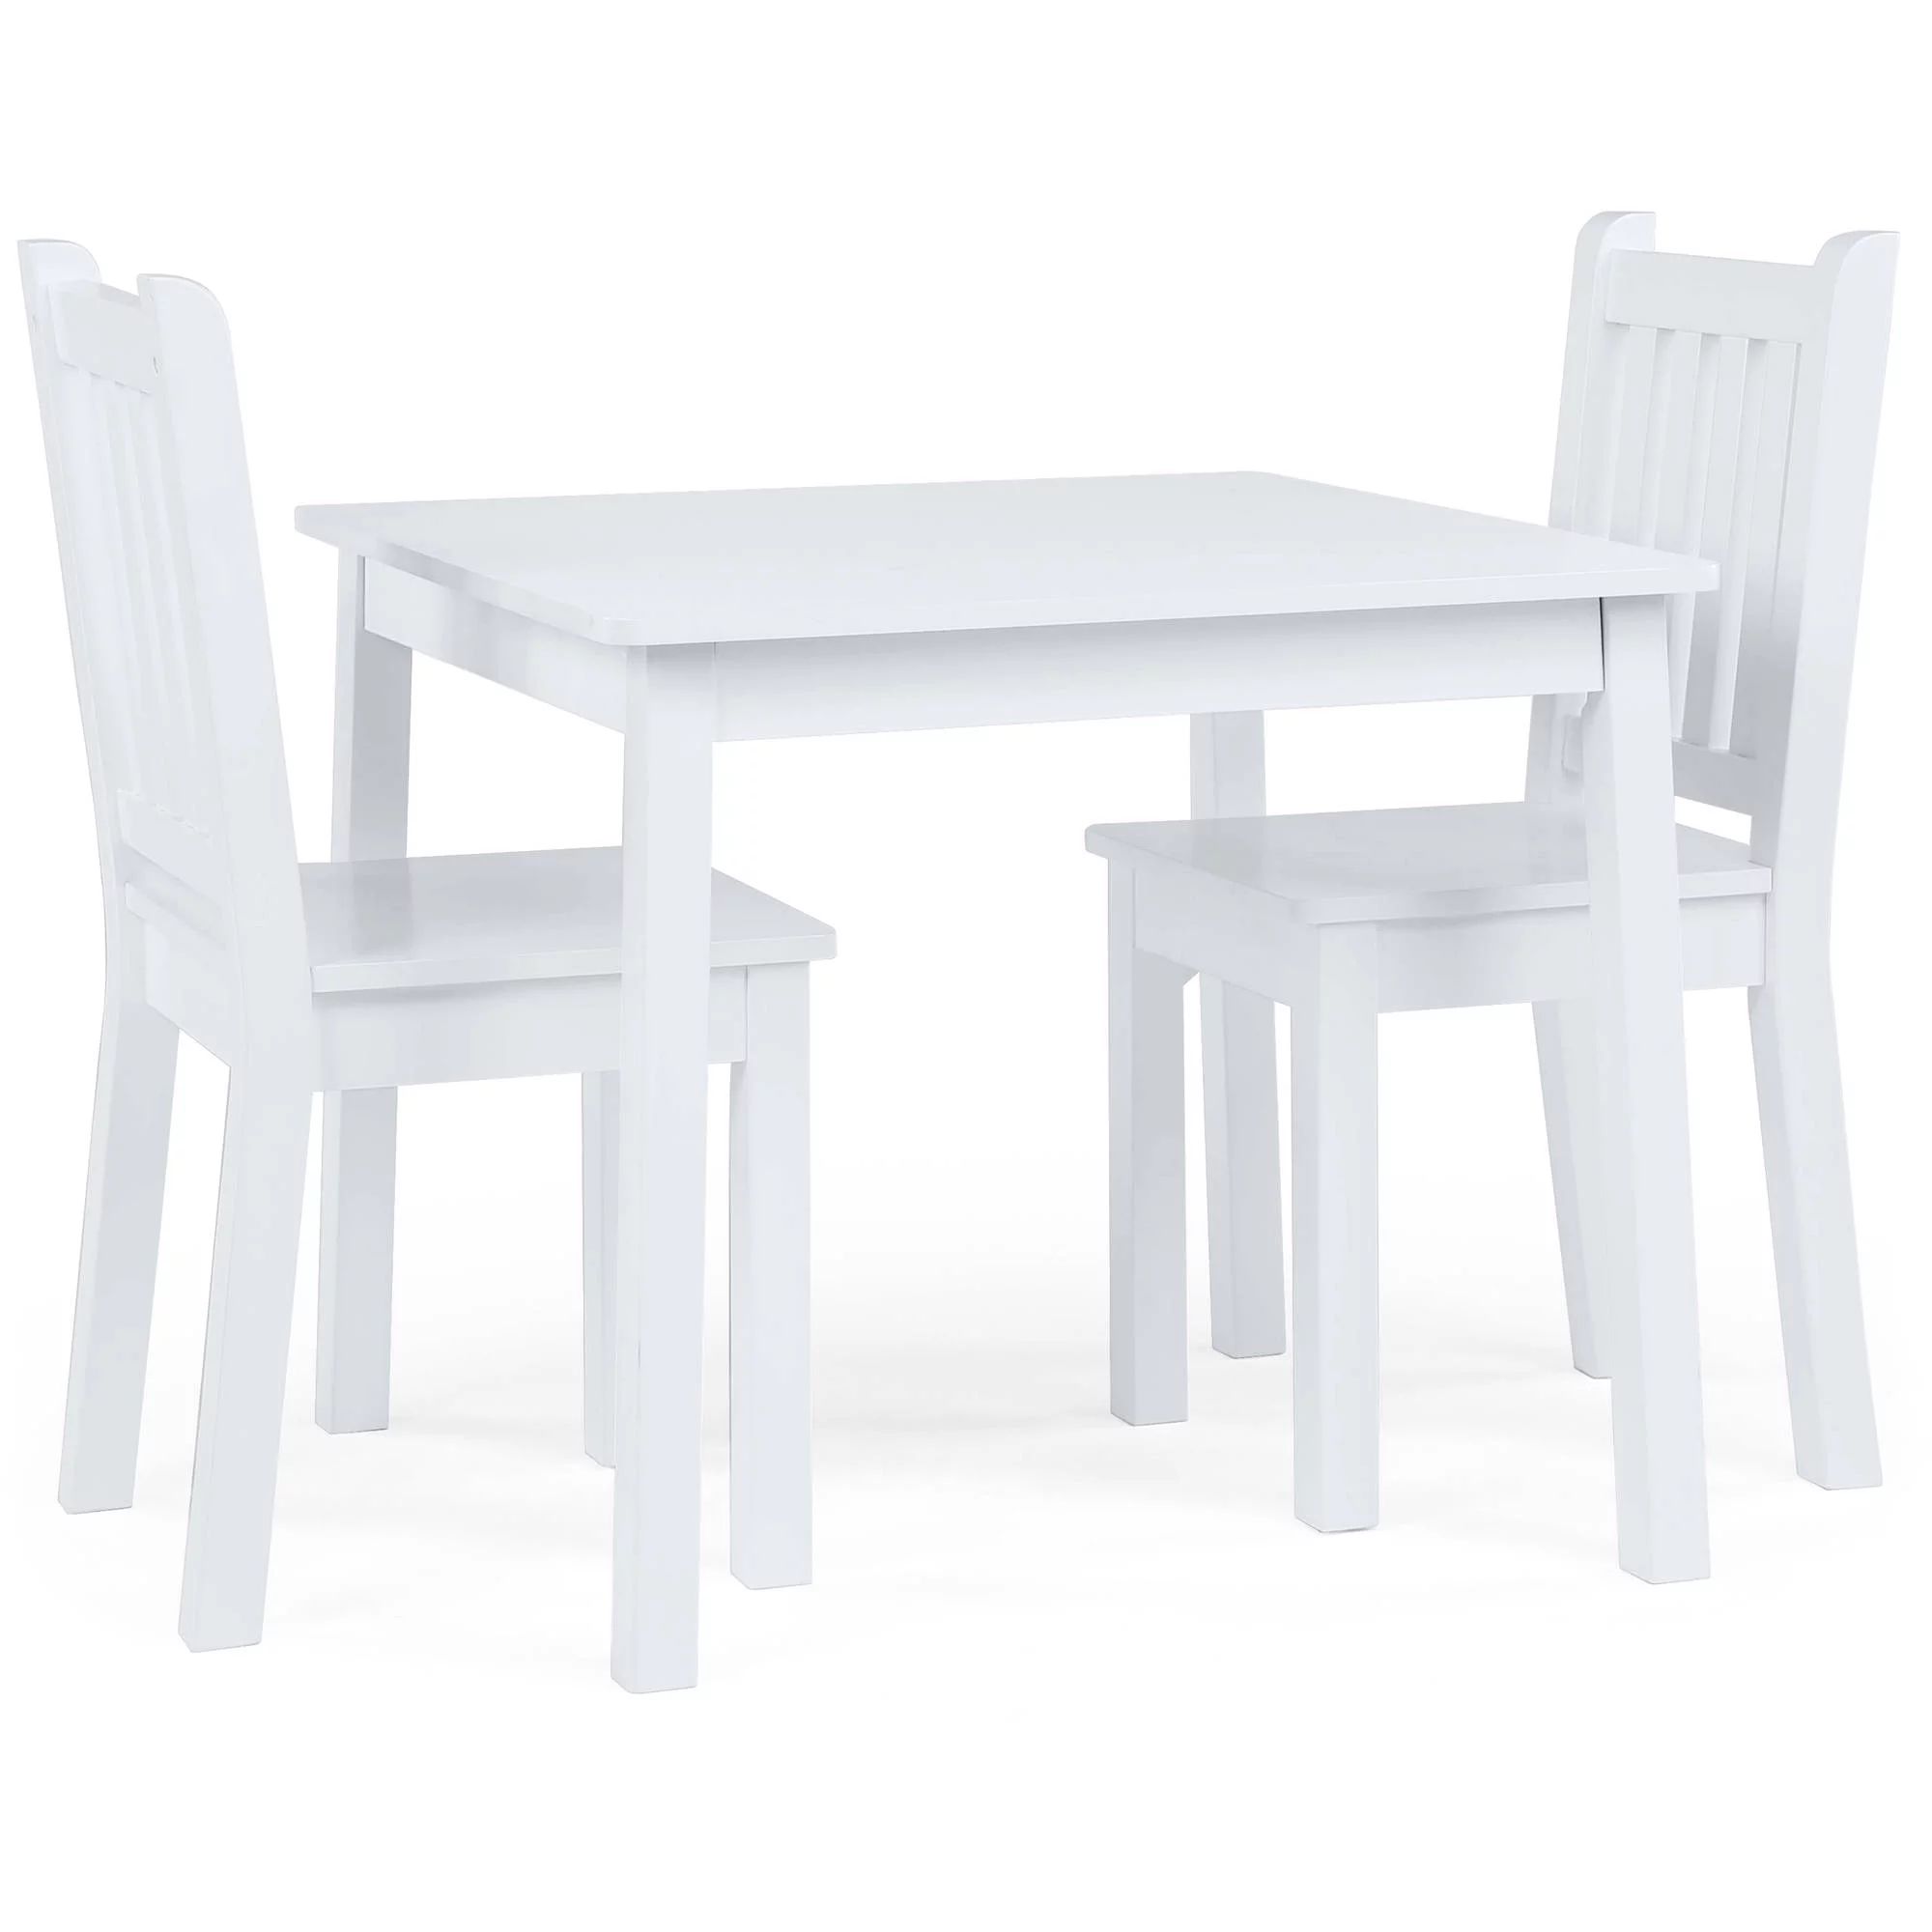 Humble Crew Daylight Kids Wood Square Table and 2 Chairs Set, White | Walmart (US)